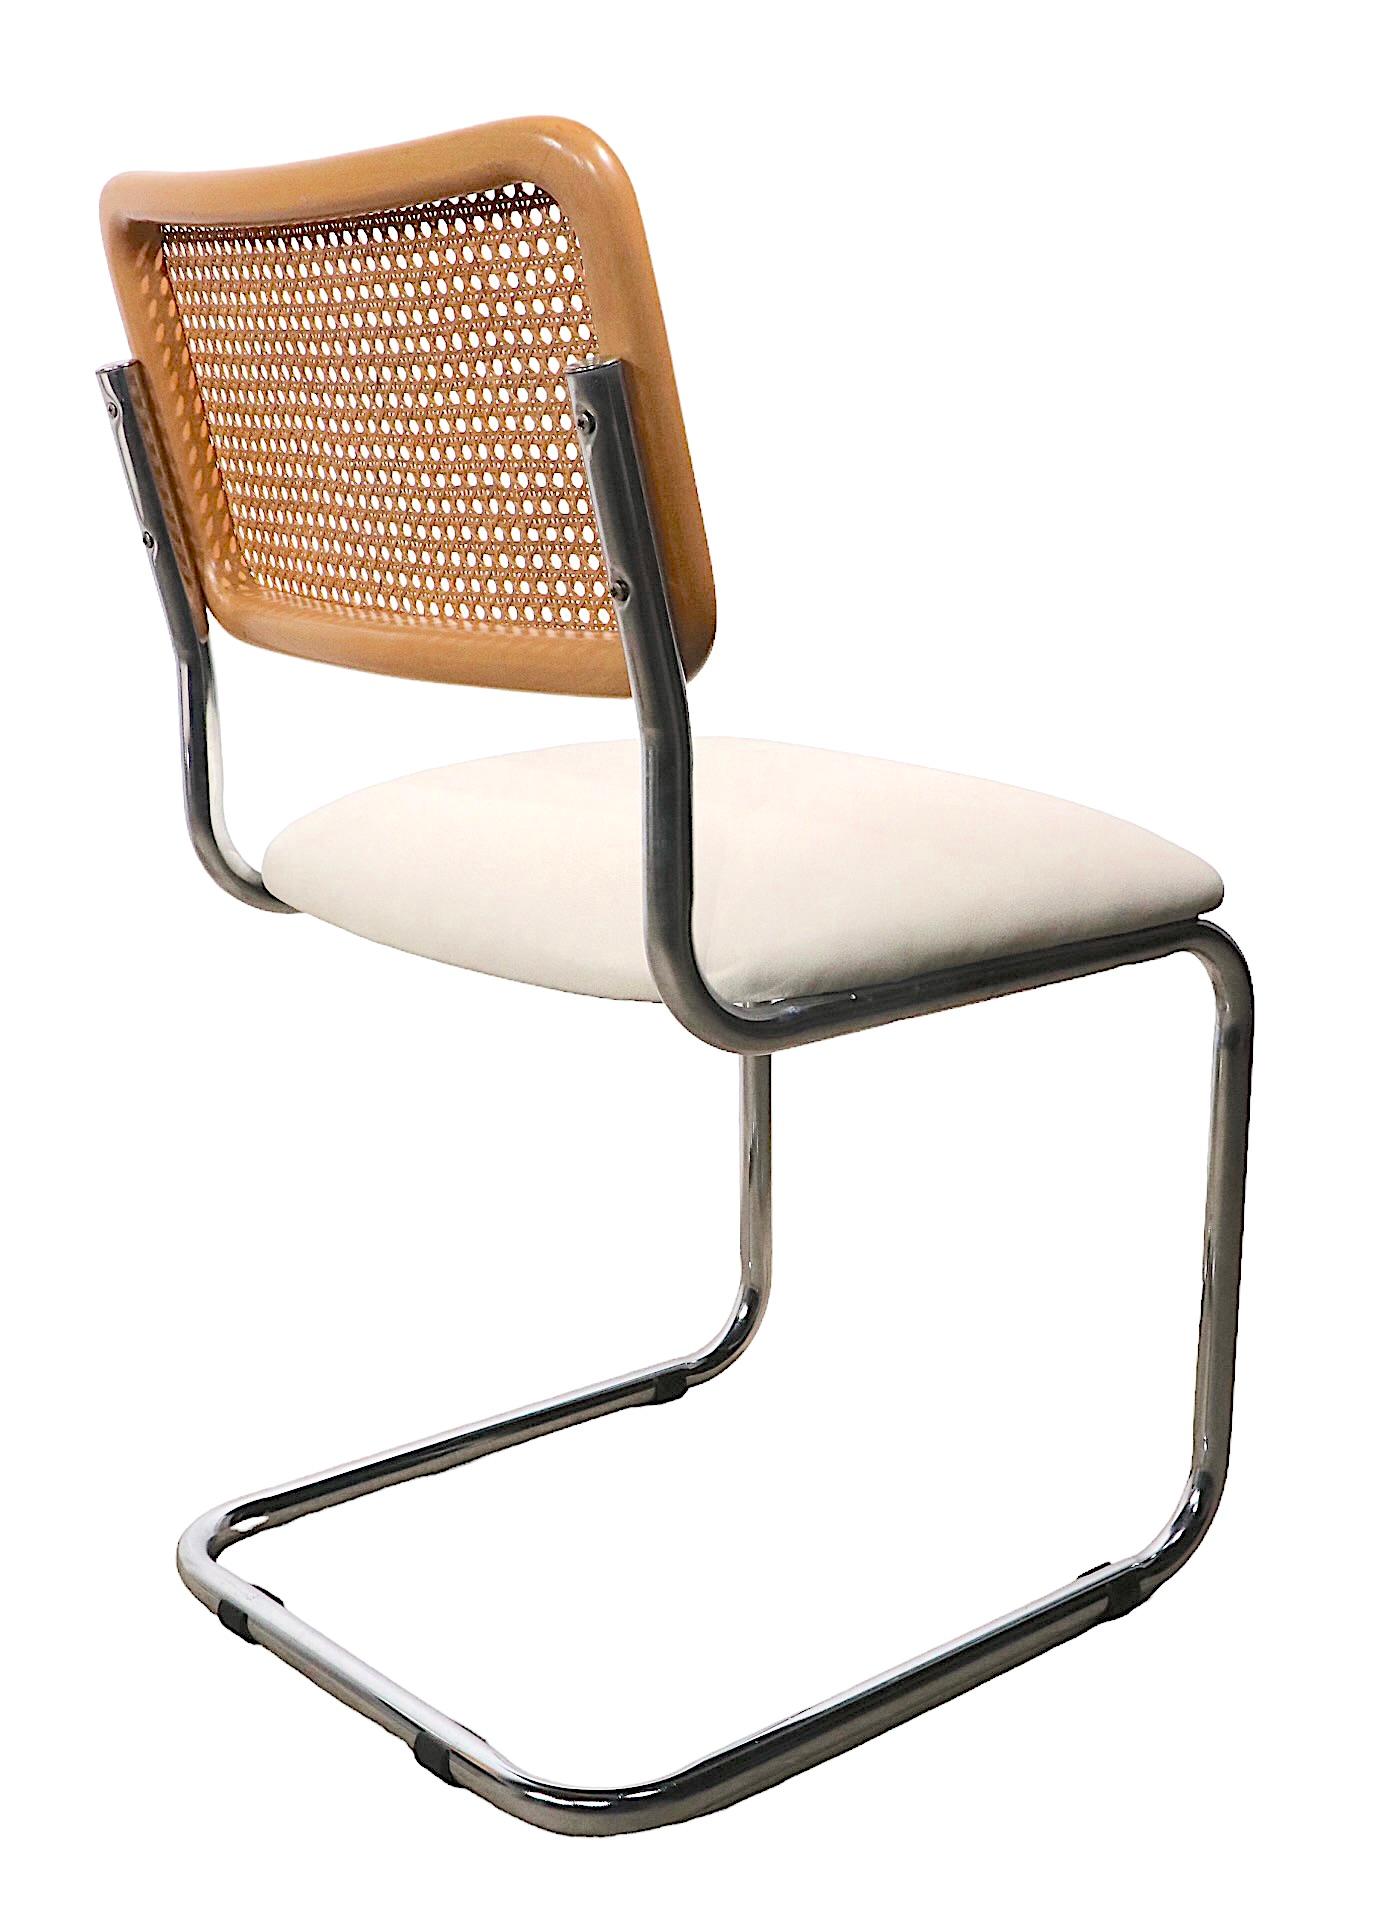 Late 20th Century Set of Six Cesca Chairs Designed by Marcel Breuer c. 1970's